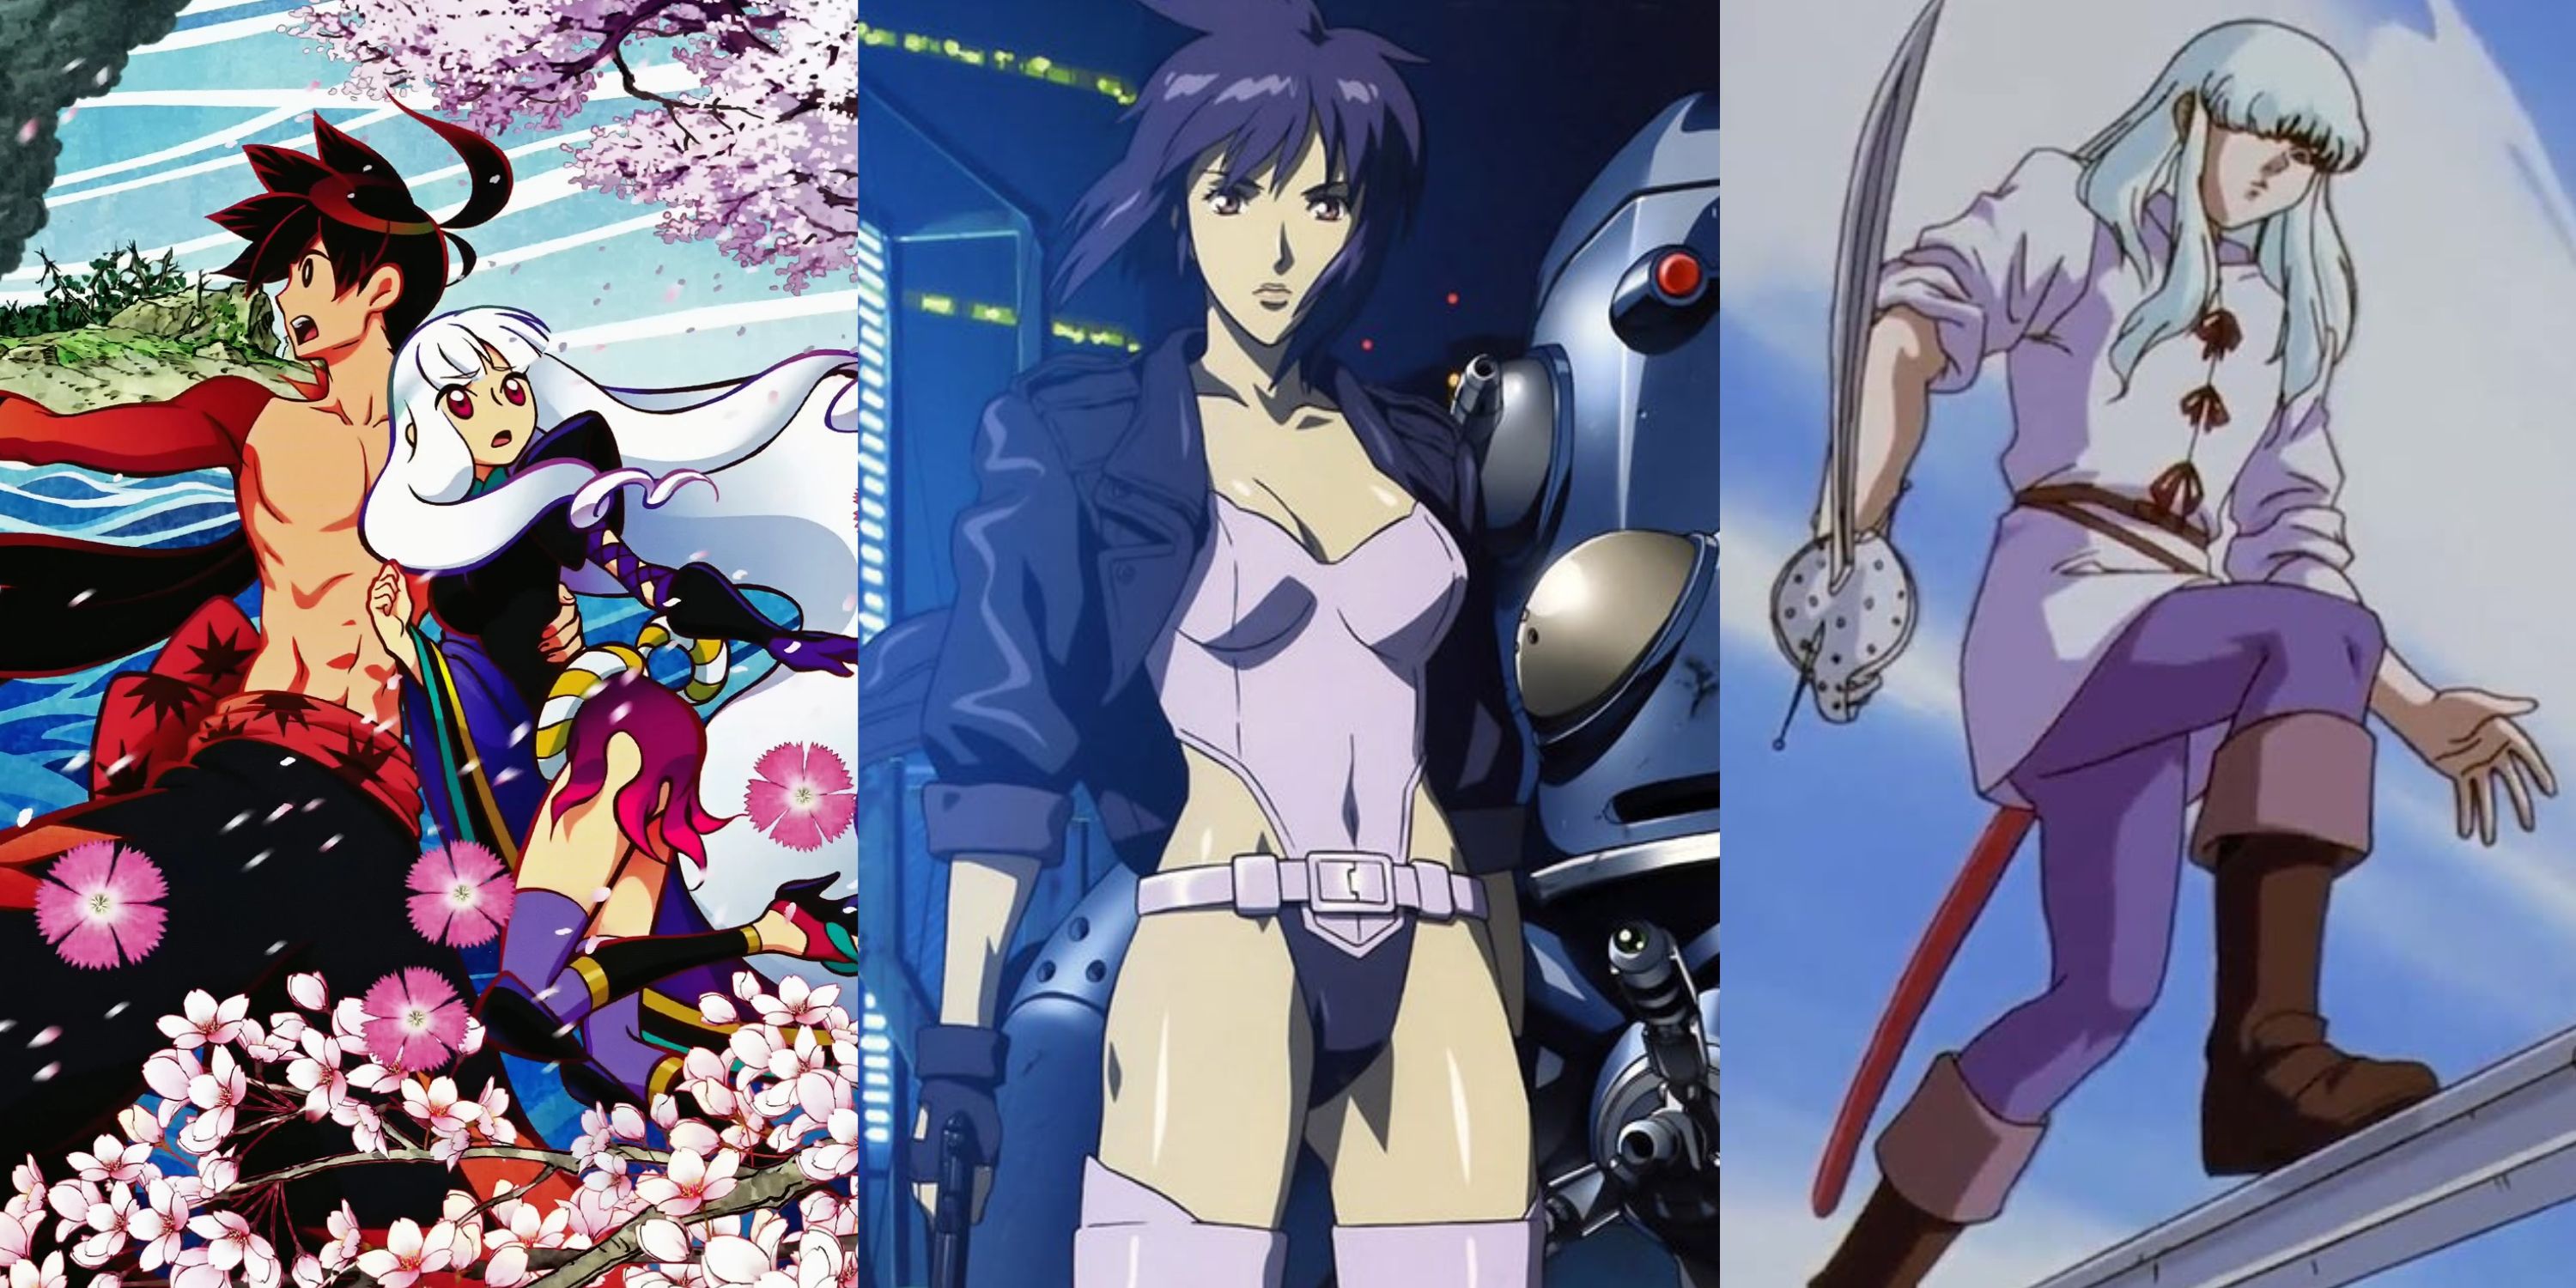 Various still from the Katanagatari, Ghost in the Shell: Stand Alone Complex, and Berserk animes